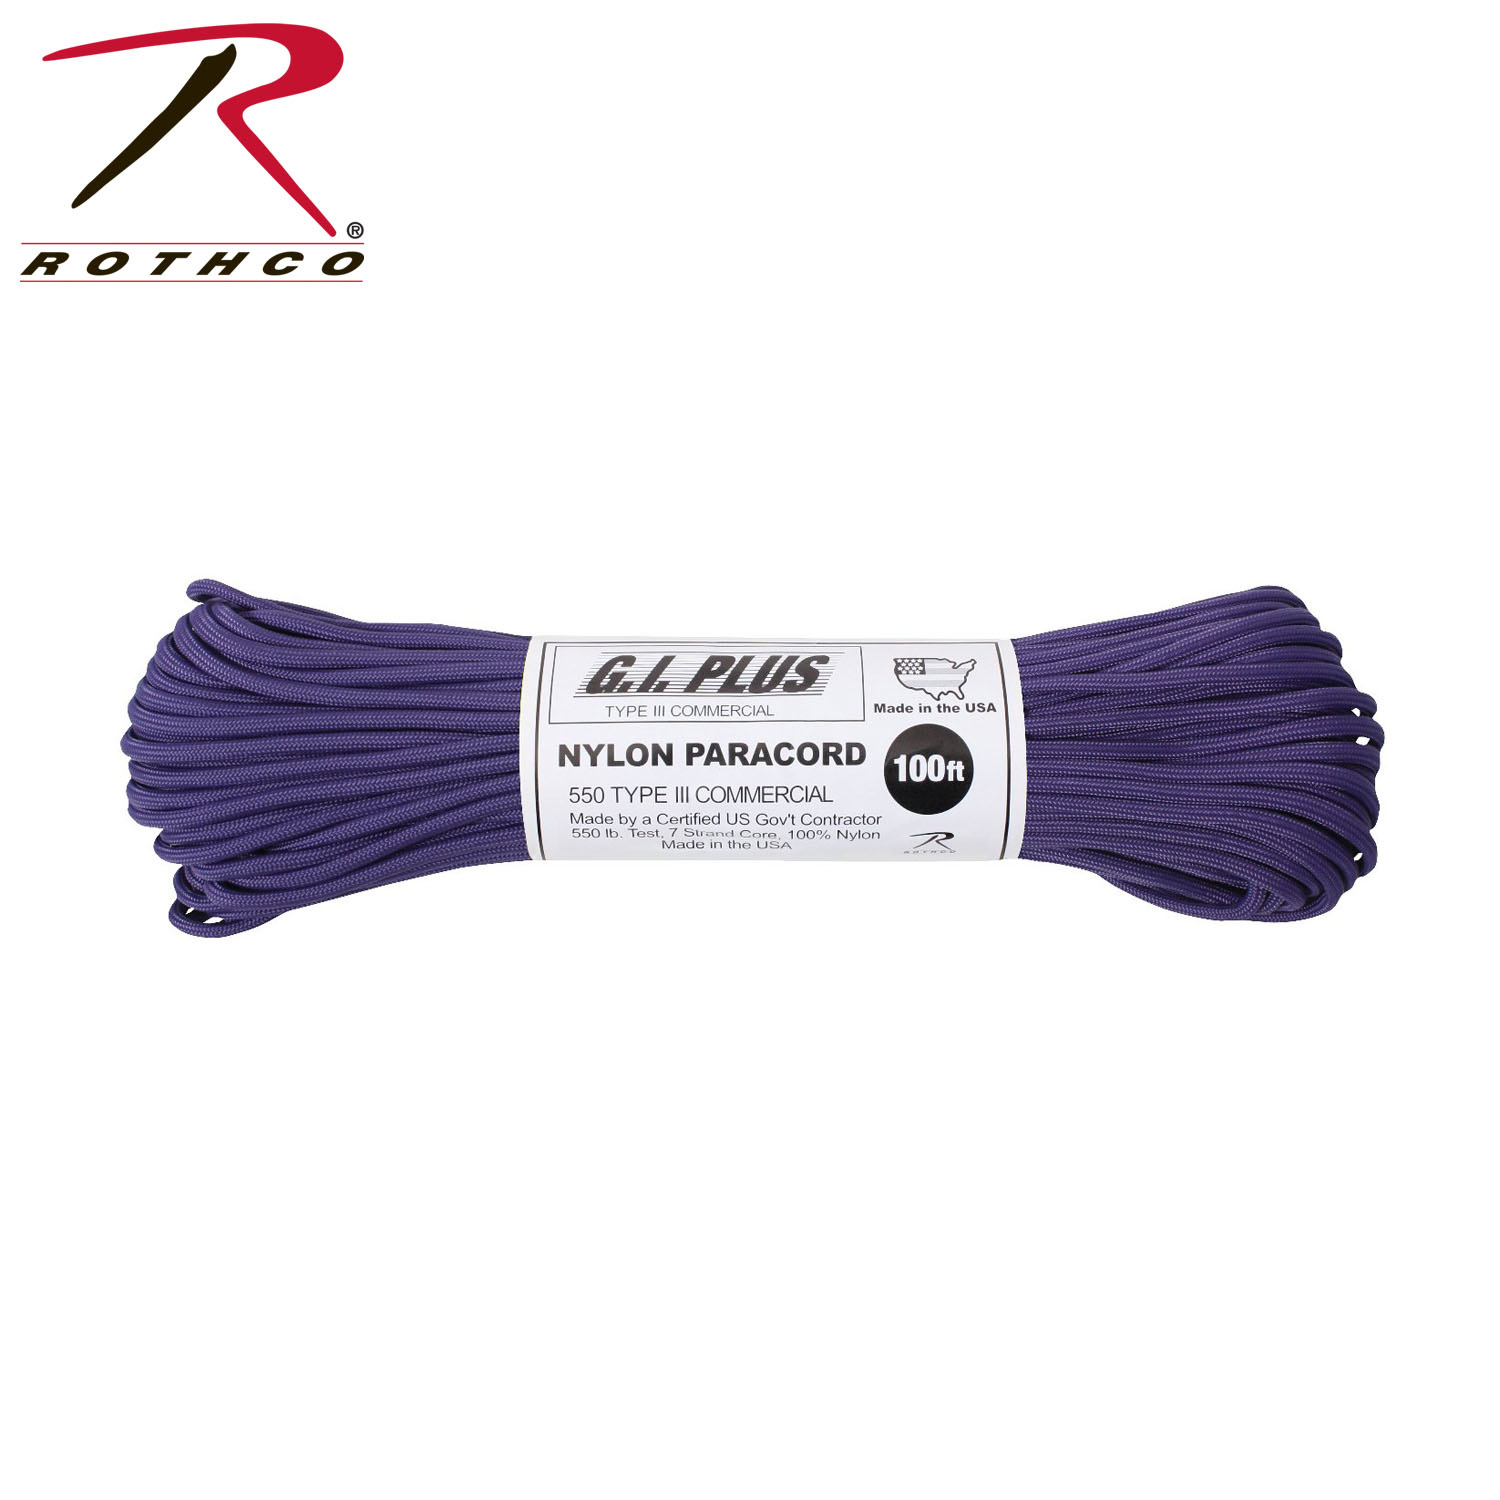 Rothco Nylon Paracord Type III 550 lb 100ft - Cache Tactical Supply